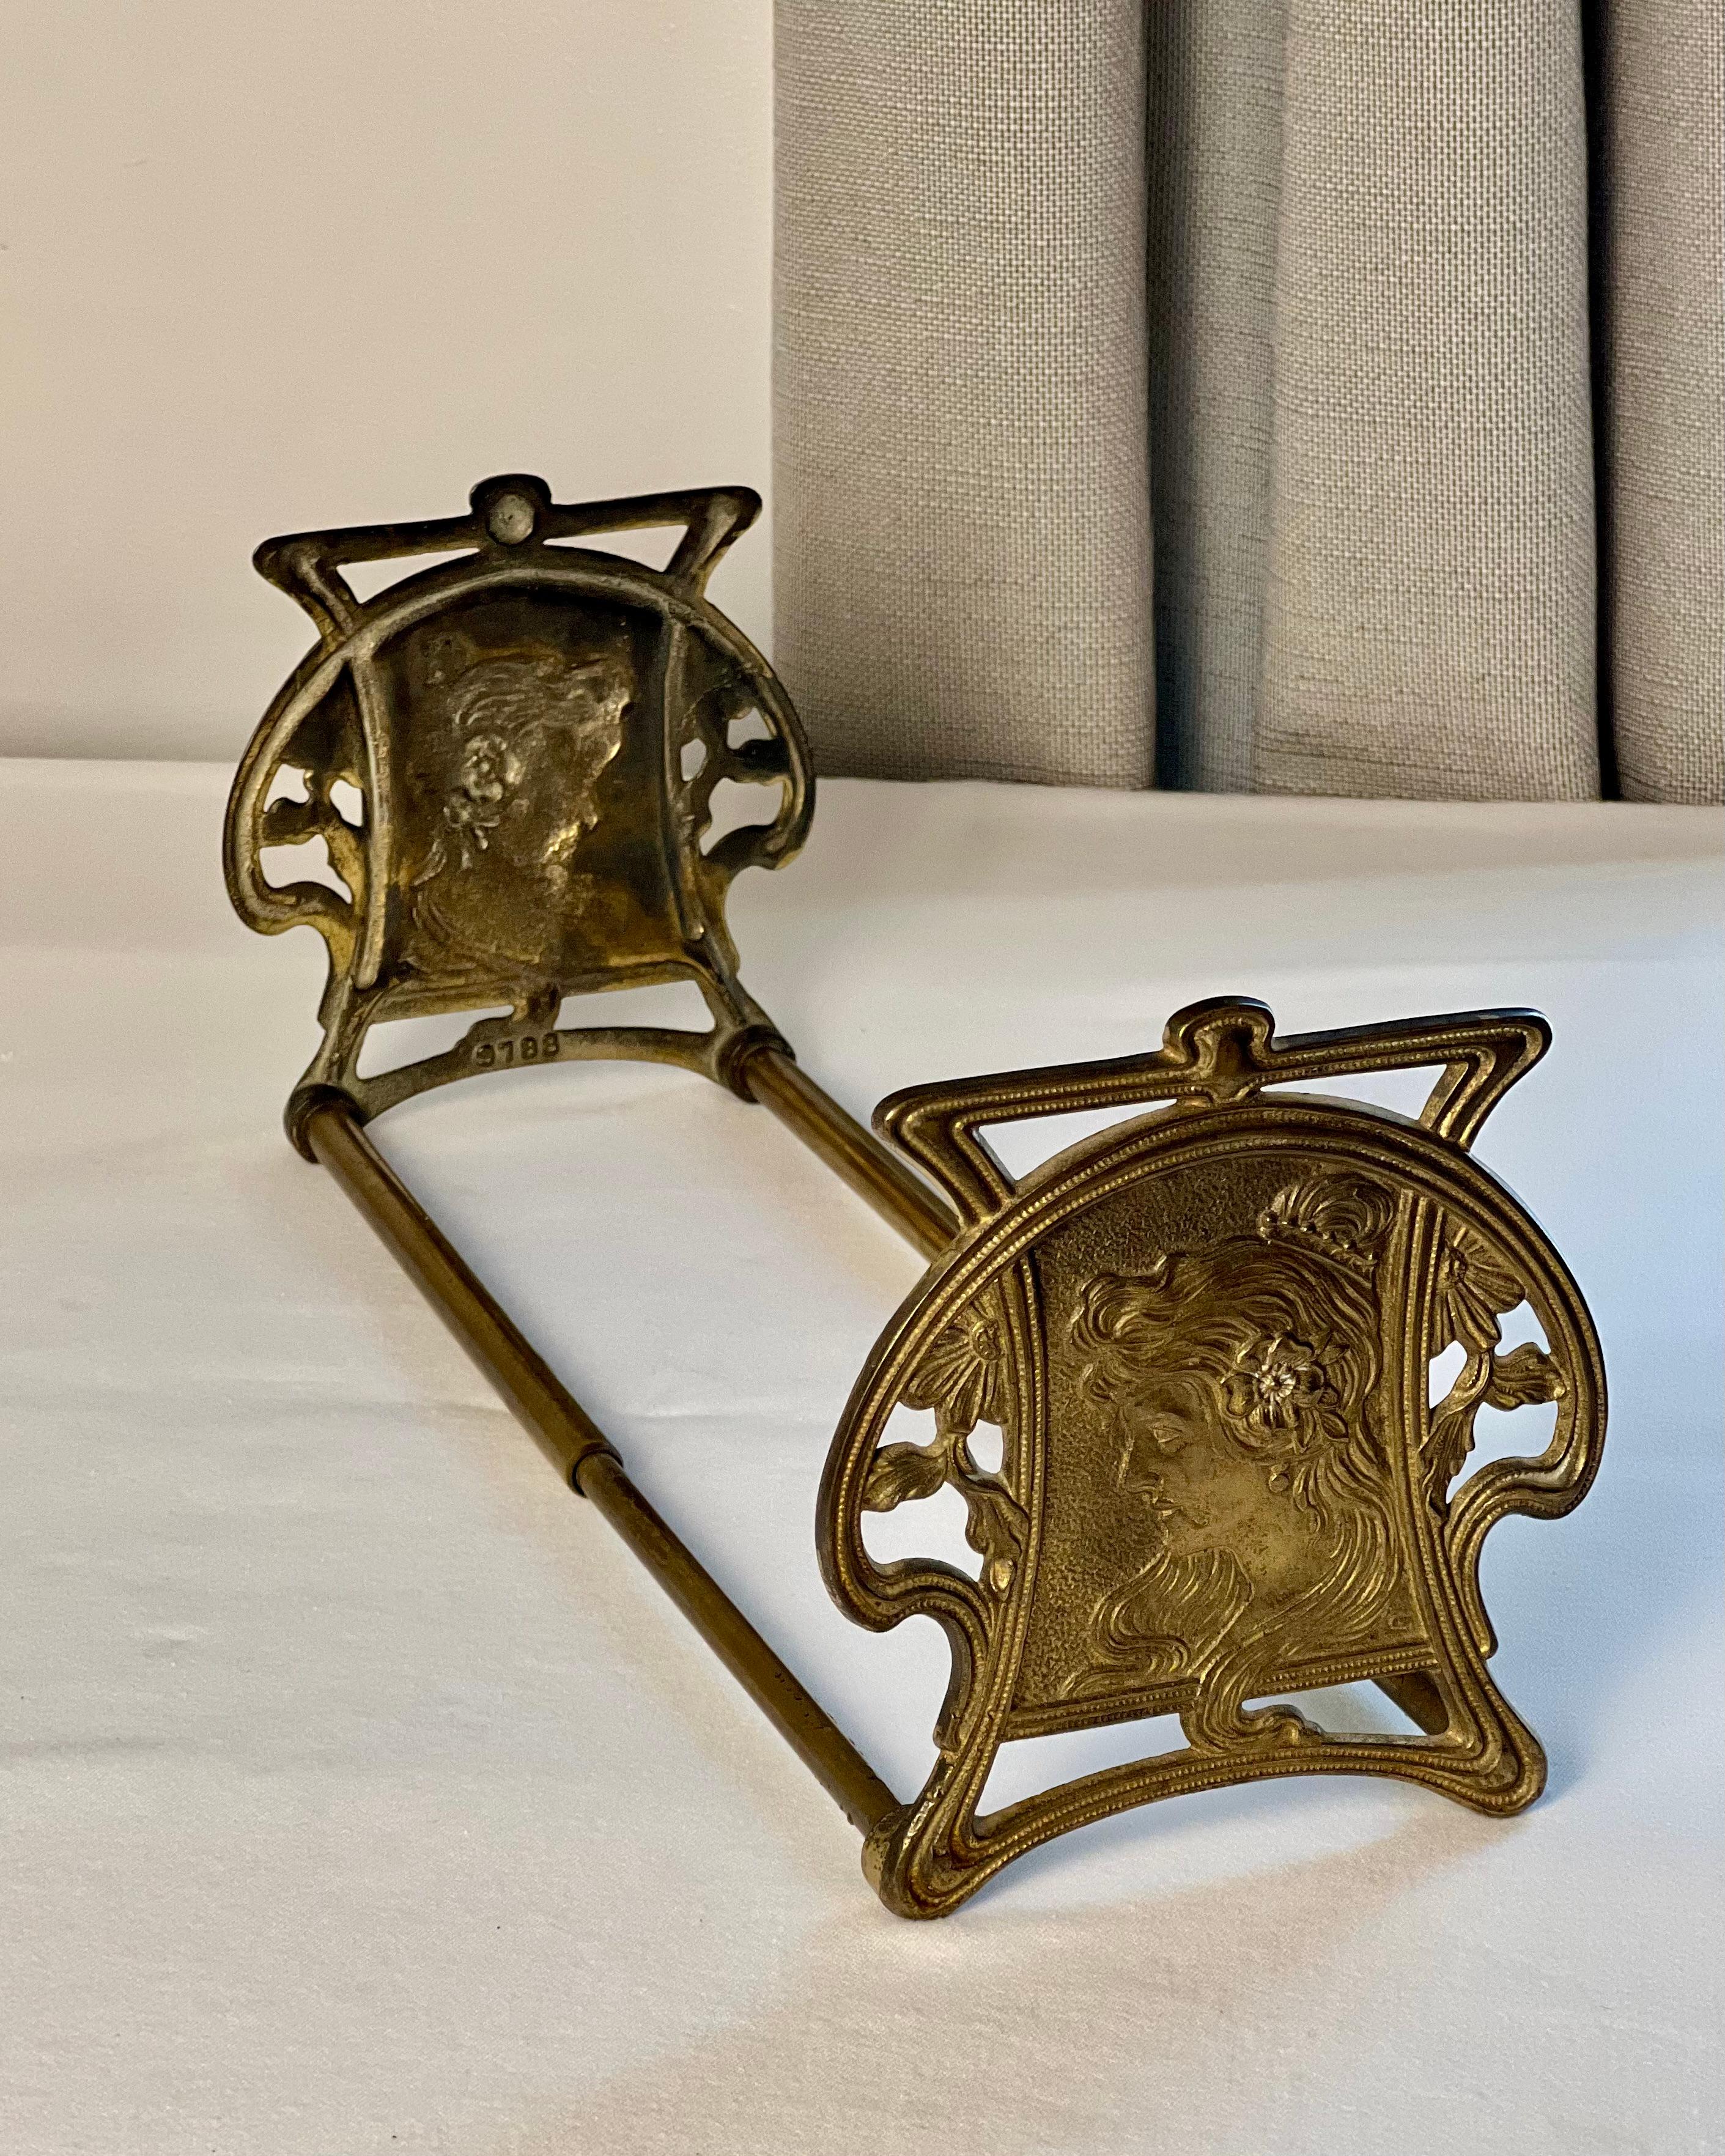 Antique Art Nouveau Cast Iron and Brass Adjustable Book Stand by Judd Company For Sale 1